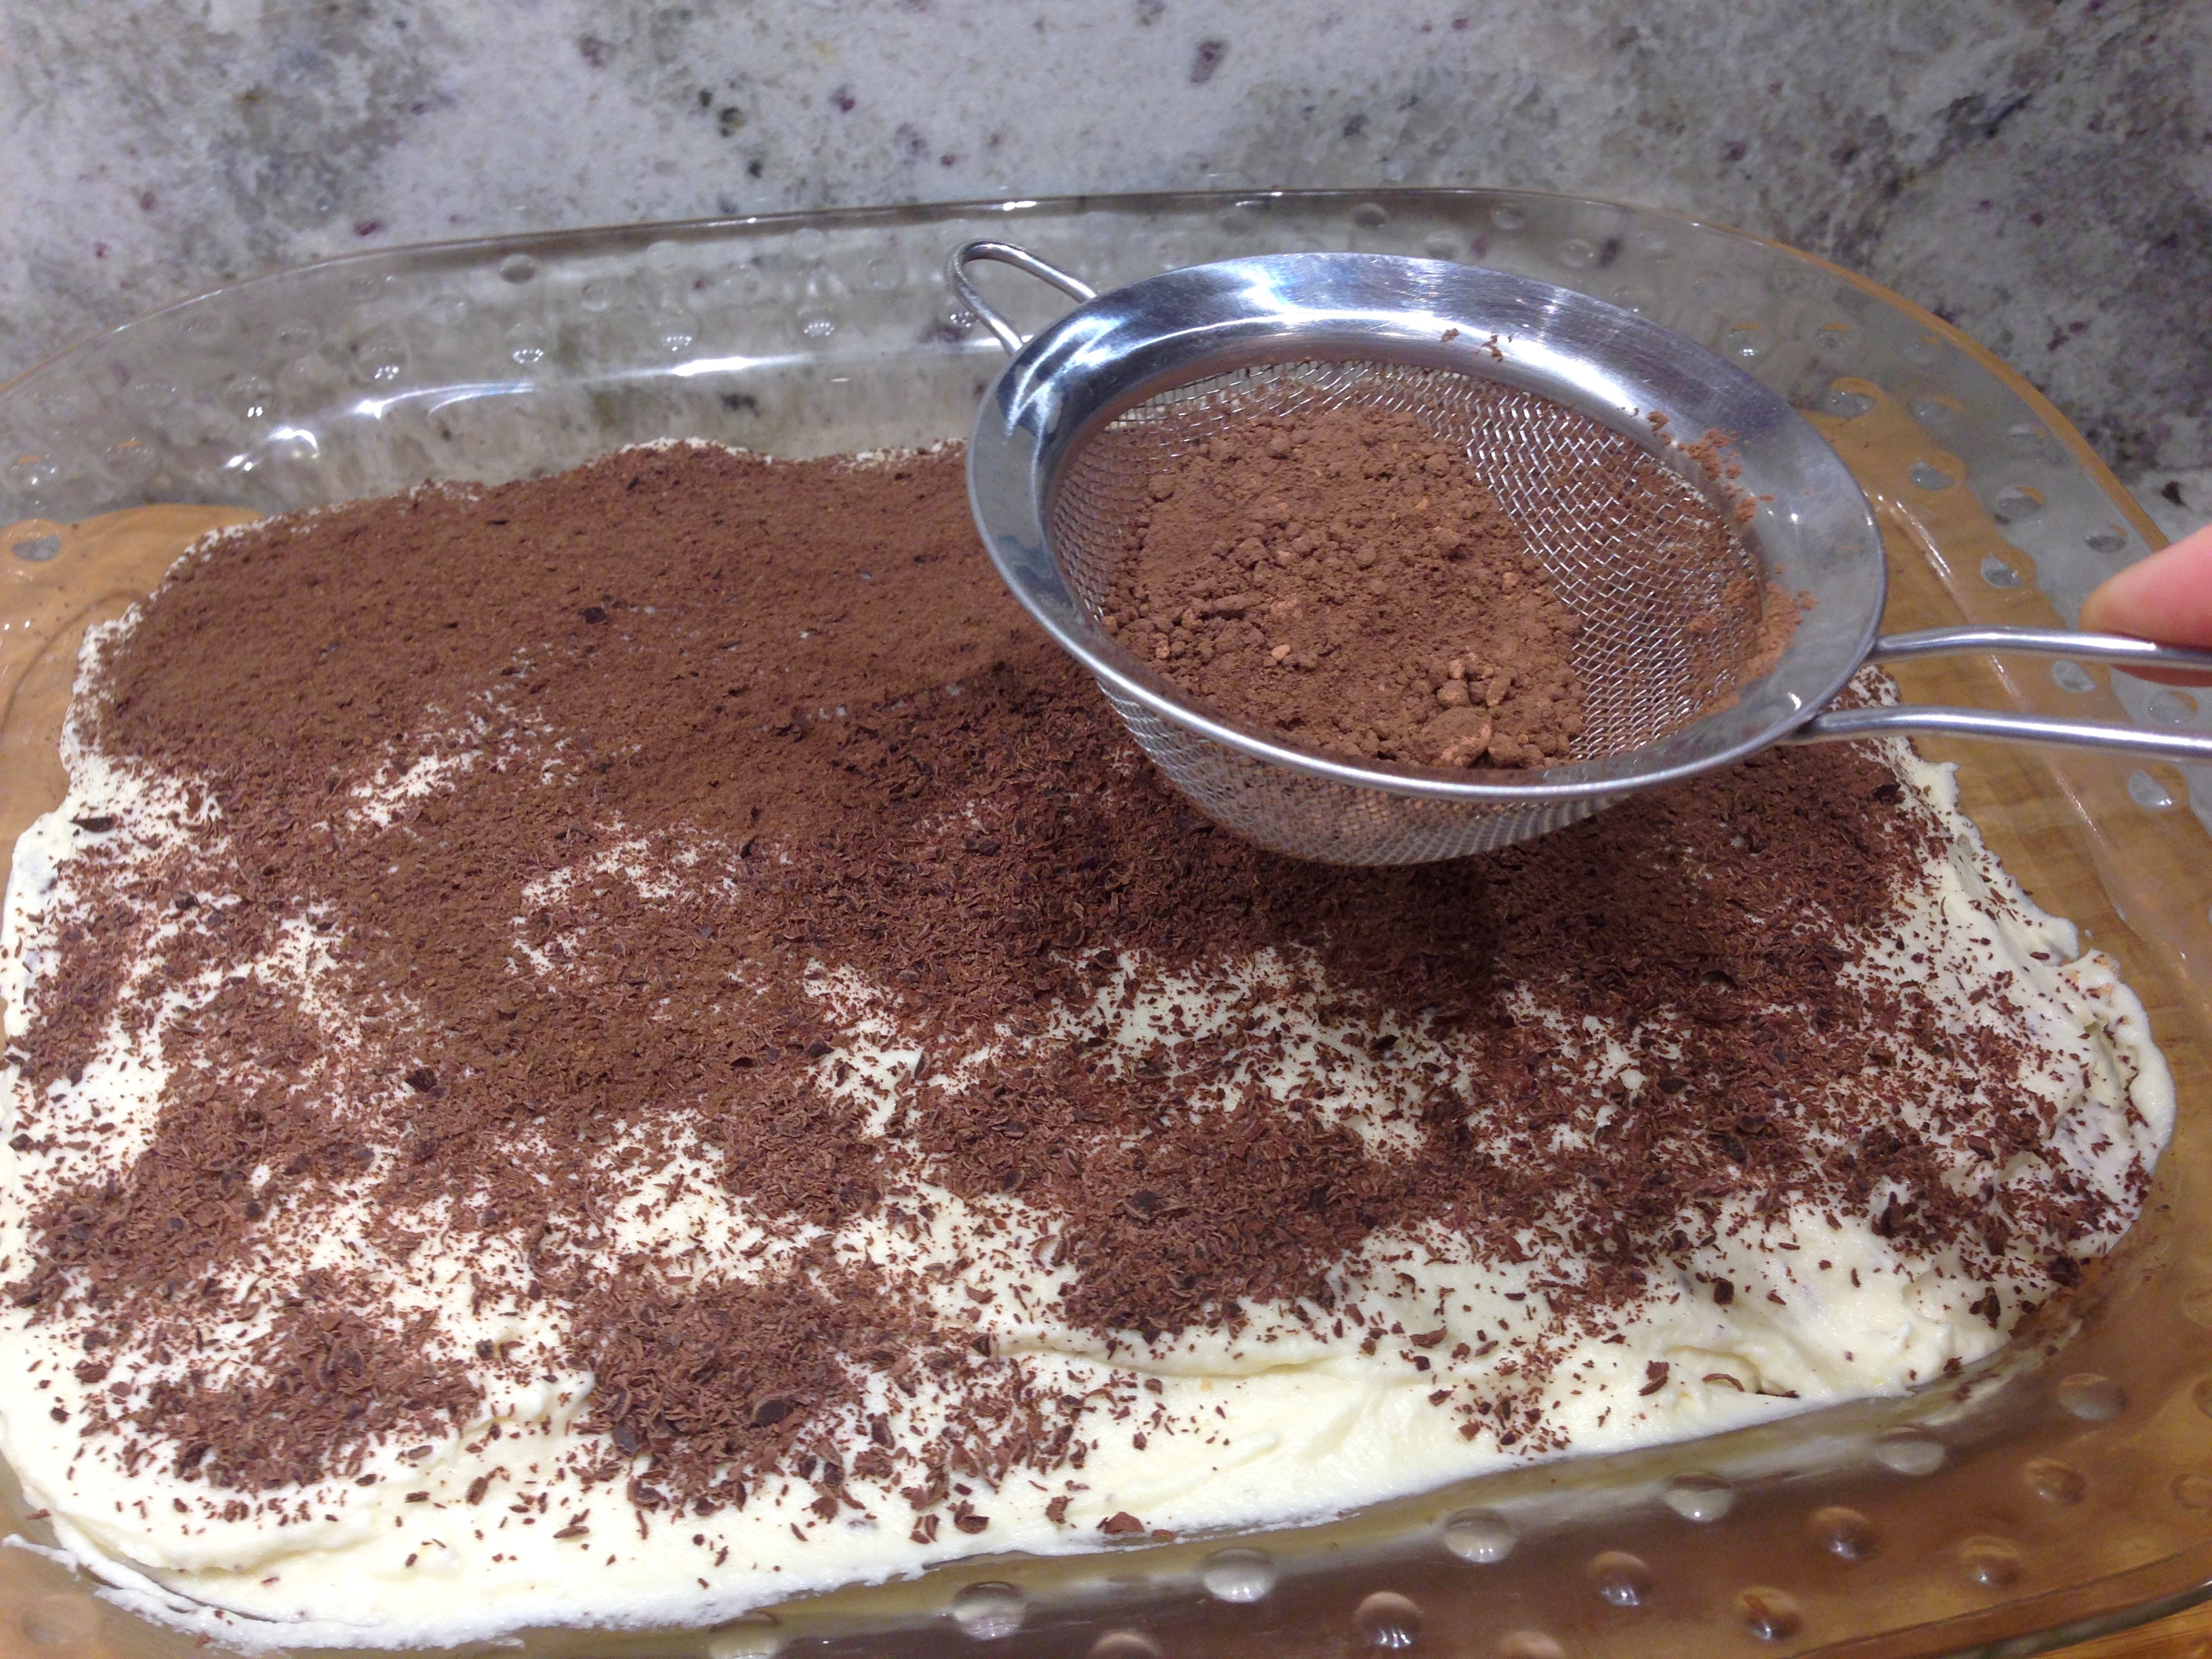 Sprinkle chocolate grated and powder